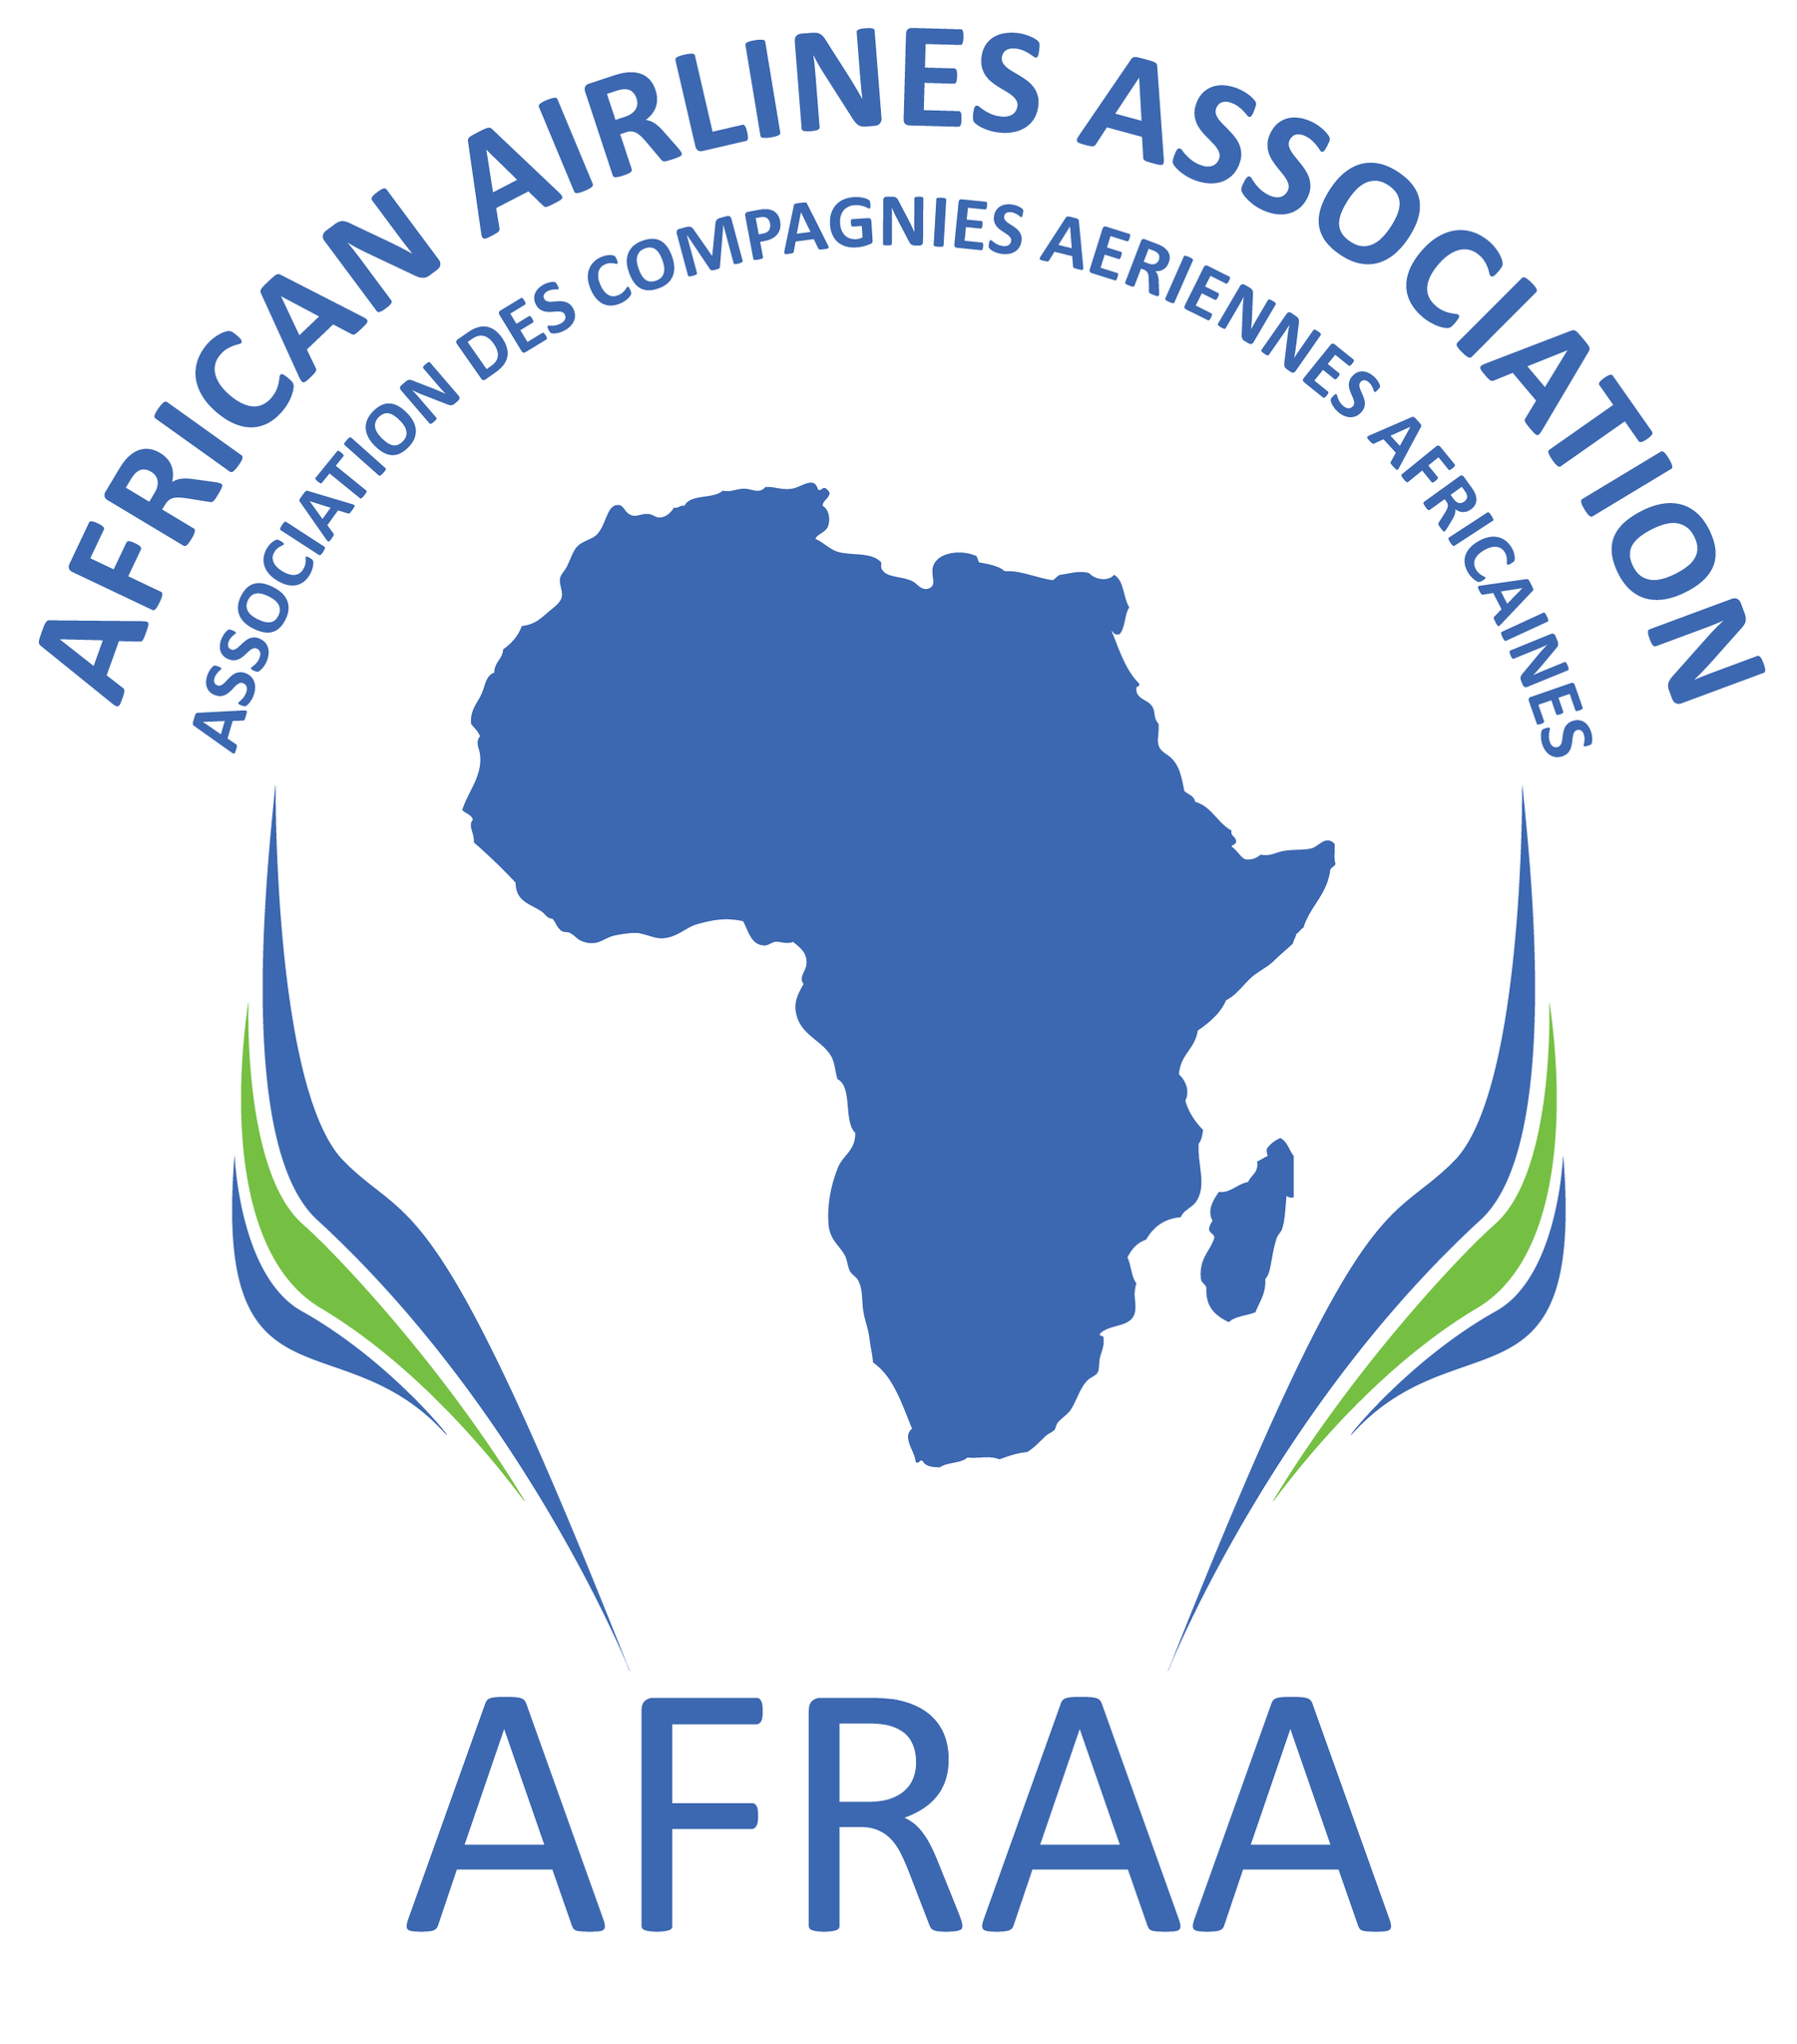 /assets/contentimages/African_Airlines_Association.png